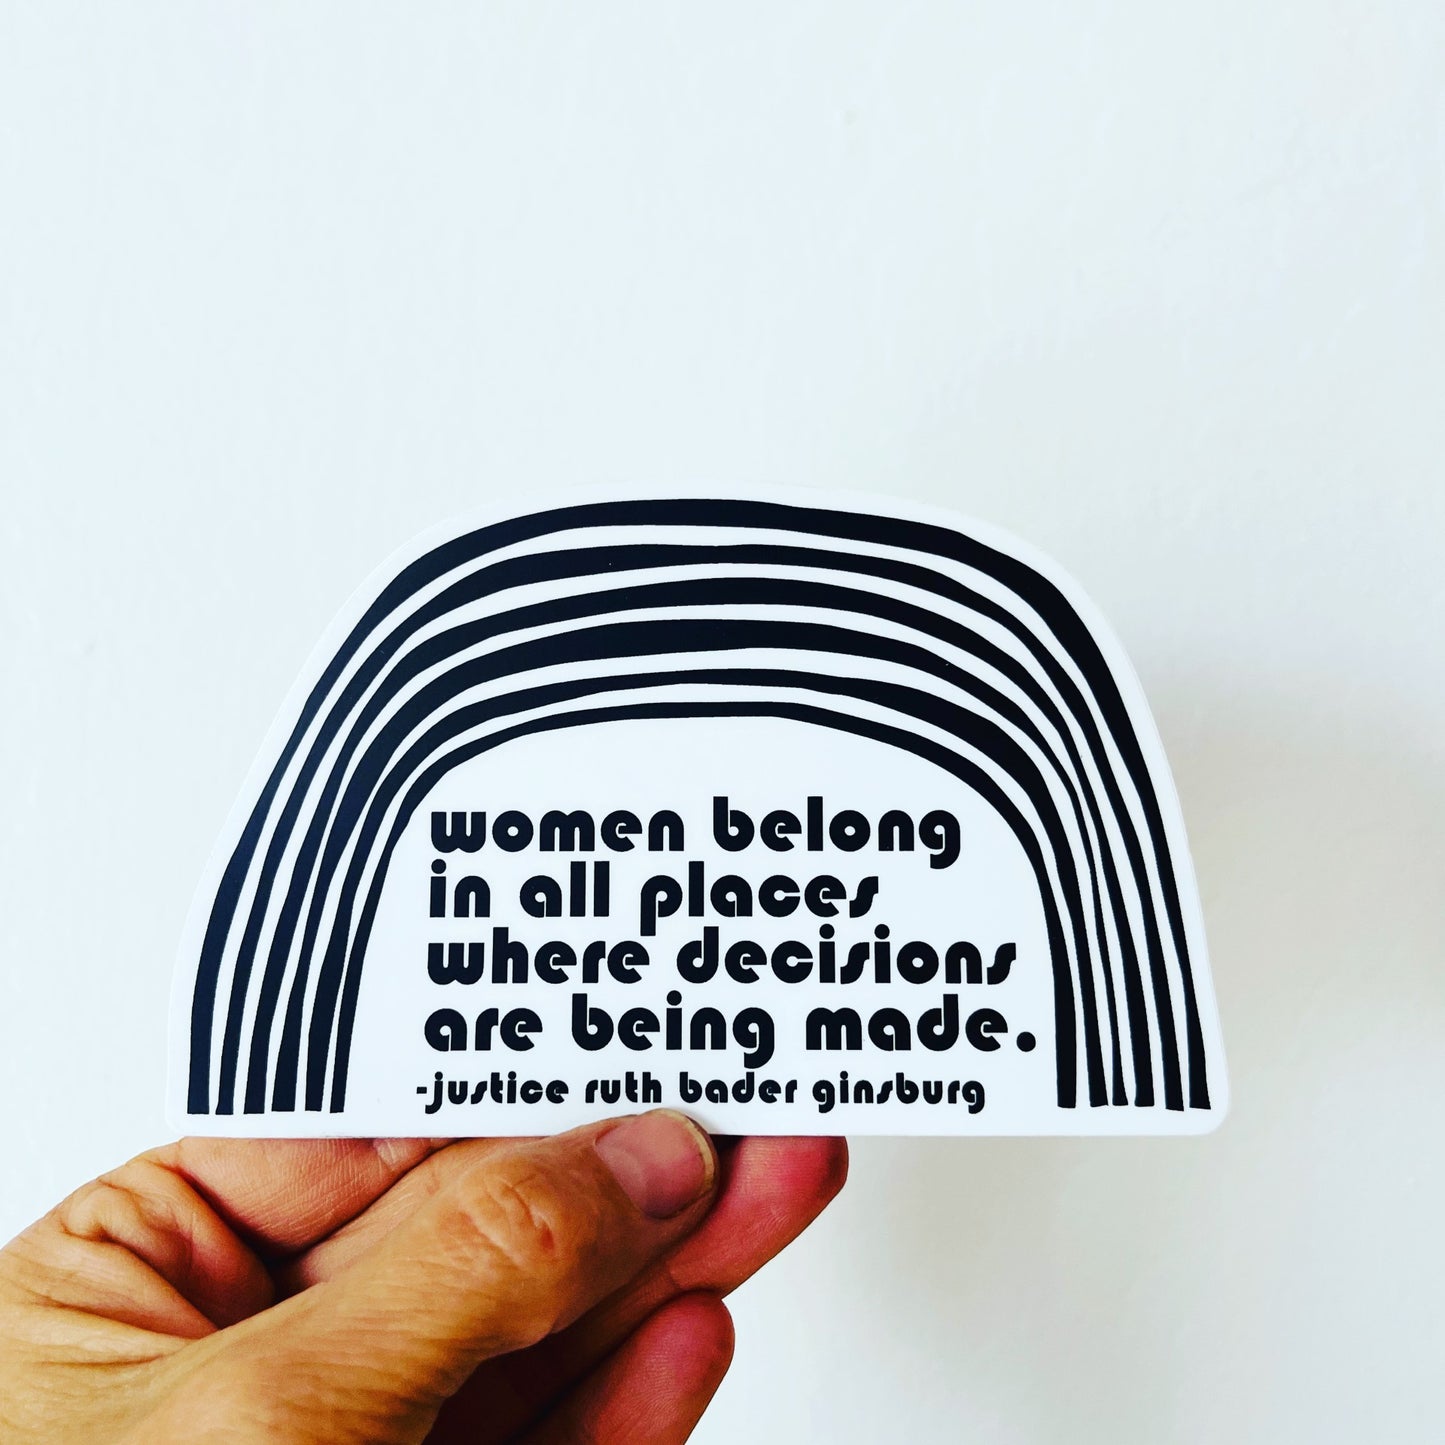 sticker ruth bader ginsburg women belong in all places where decisions are being made rbg